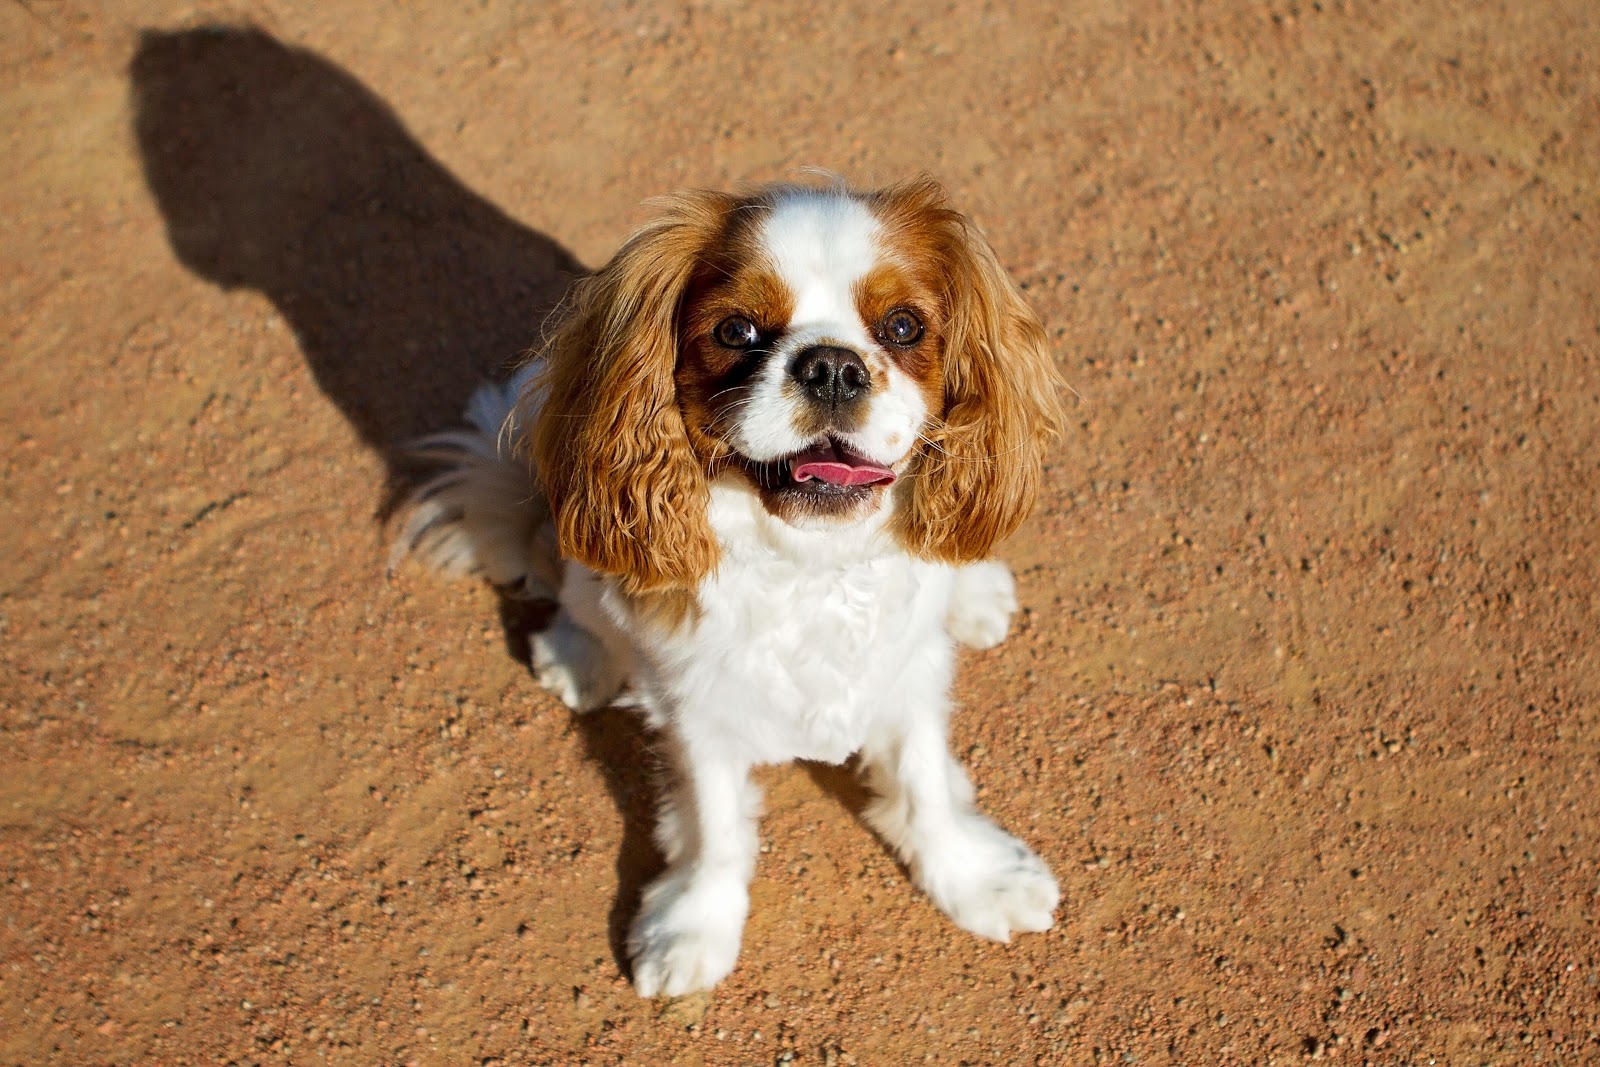 Cavalier King Charles Spaniels are perfect dog breeds for families due to their calmness and independence.